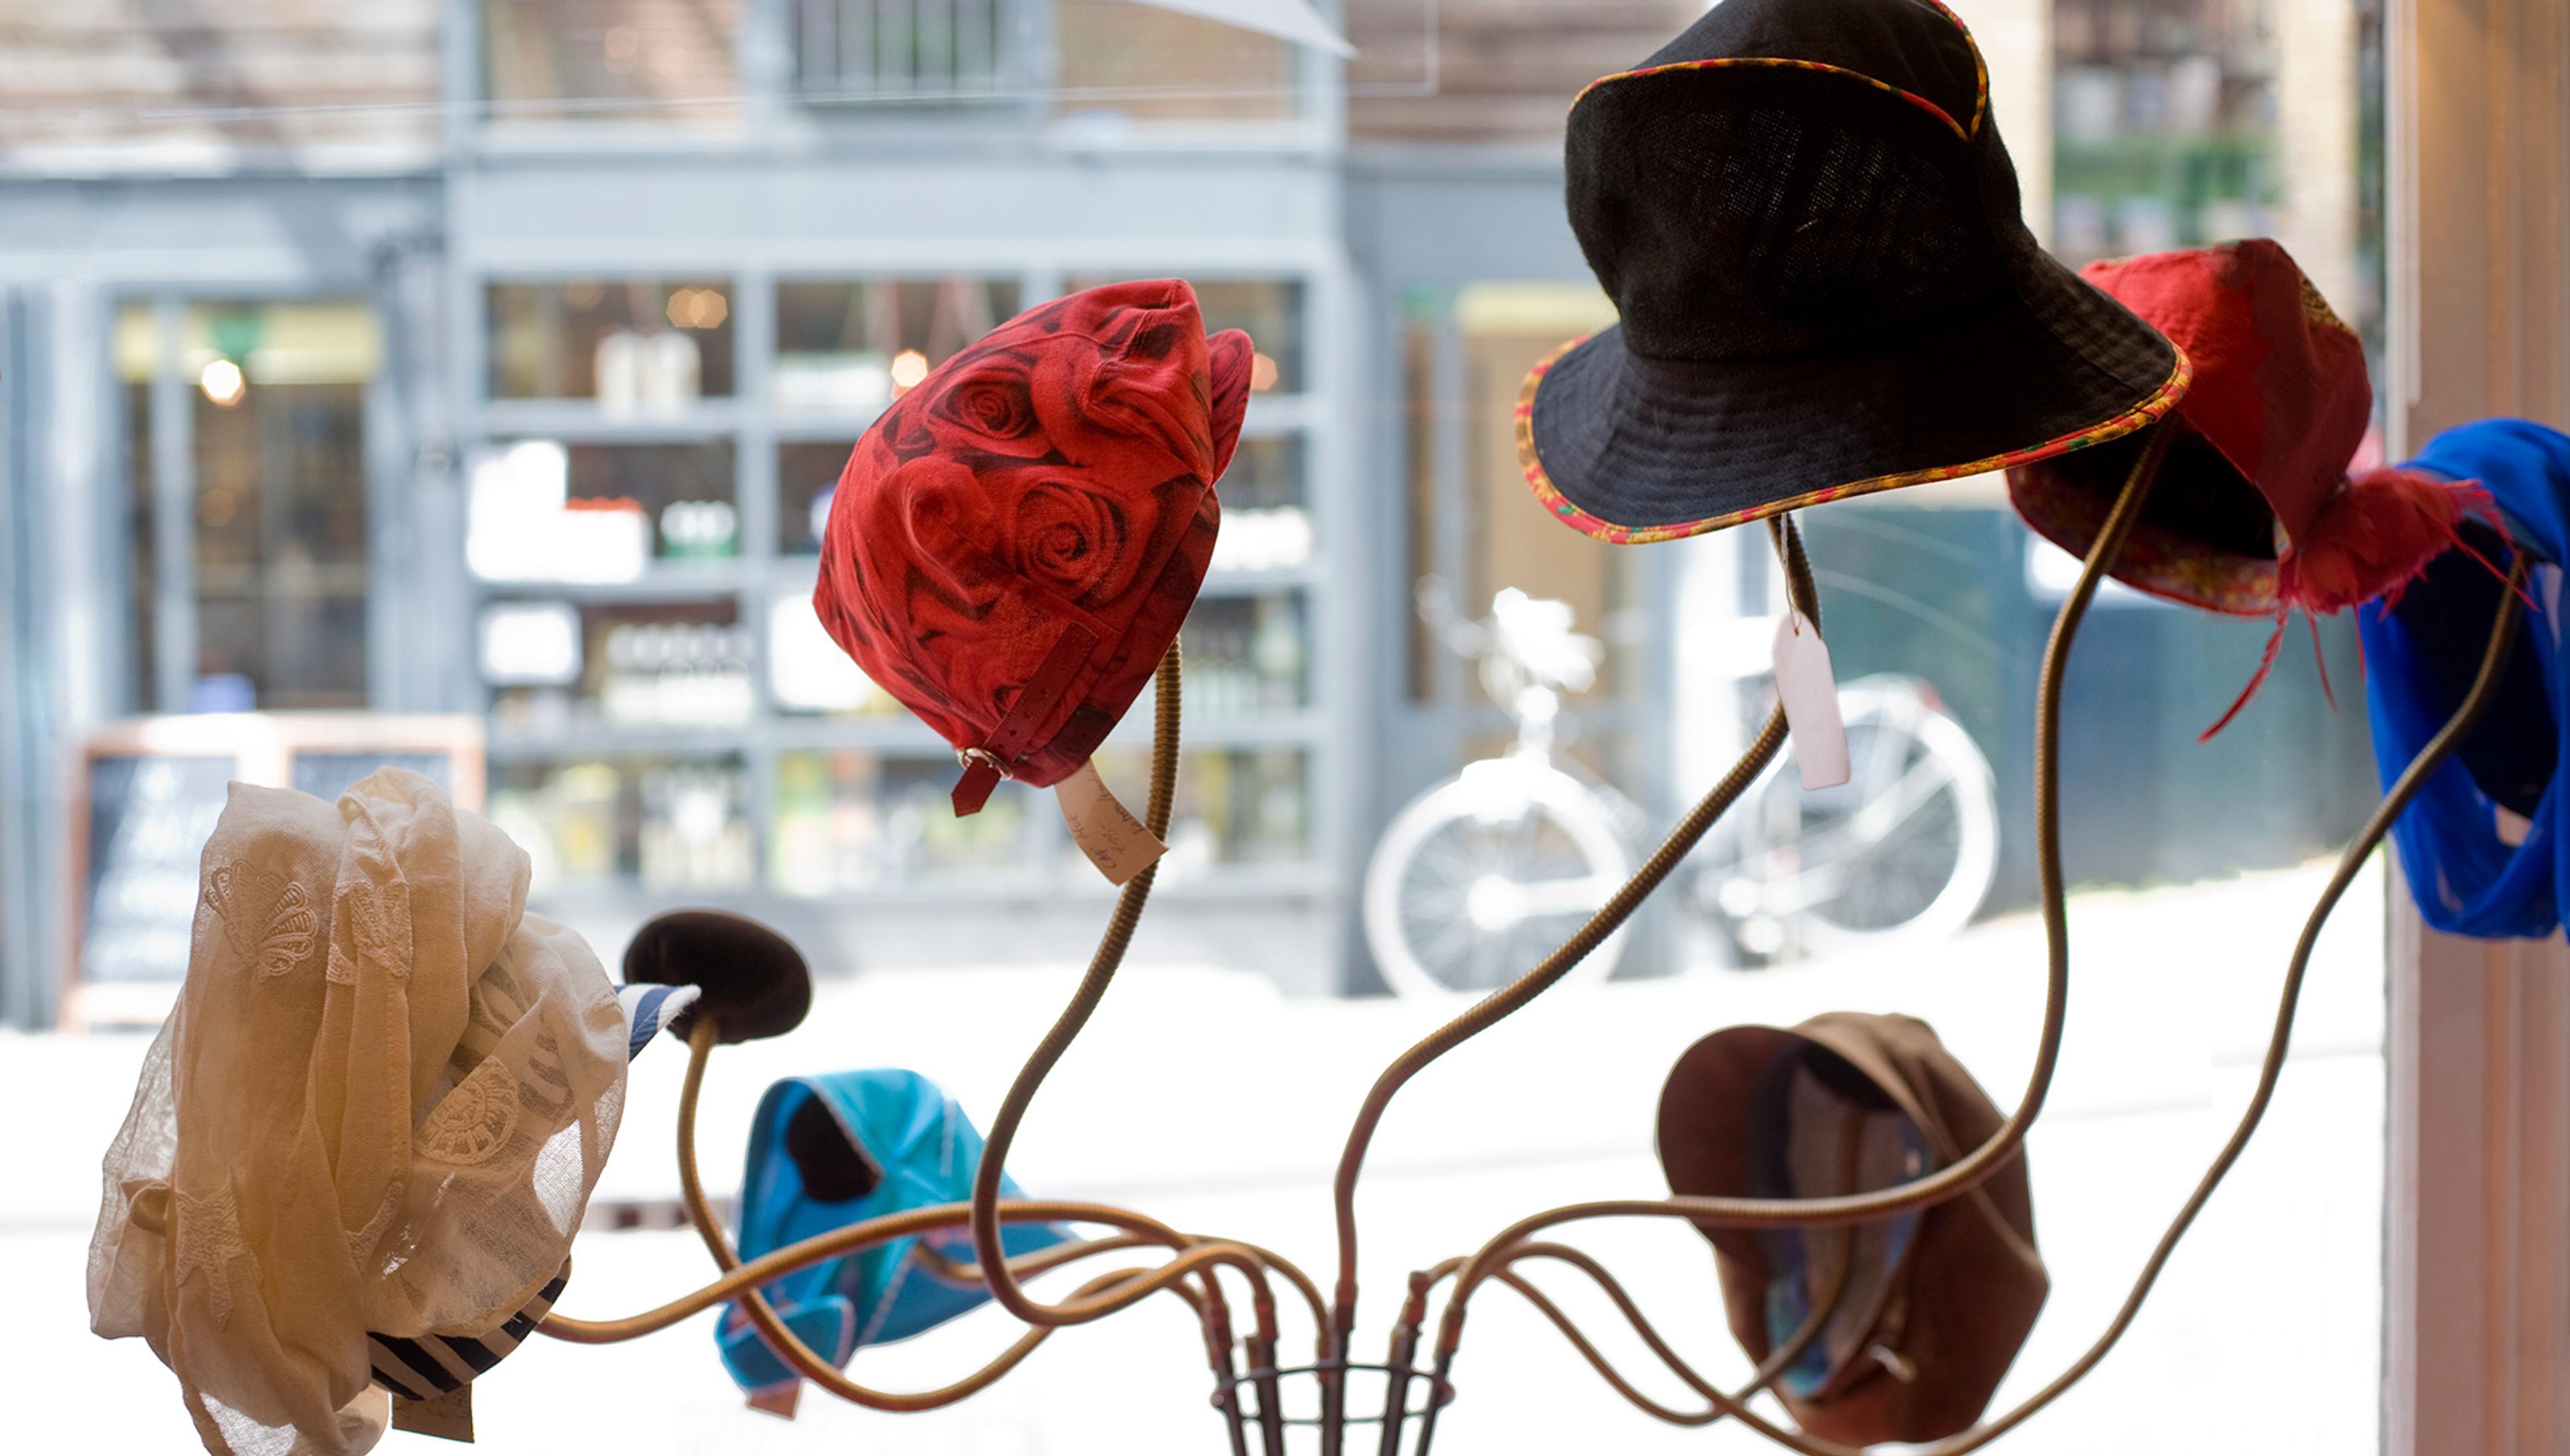 A display of various hats, including a red floral hat, a black hat with a coloured brim, a blue hat, and a beige lacy hat, shown on stand in a shop window. A blurred street with a bicycle is visible outside.